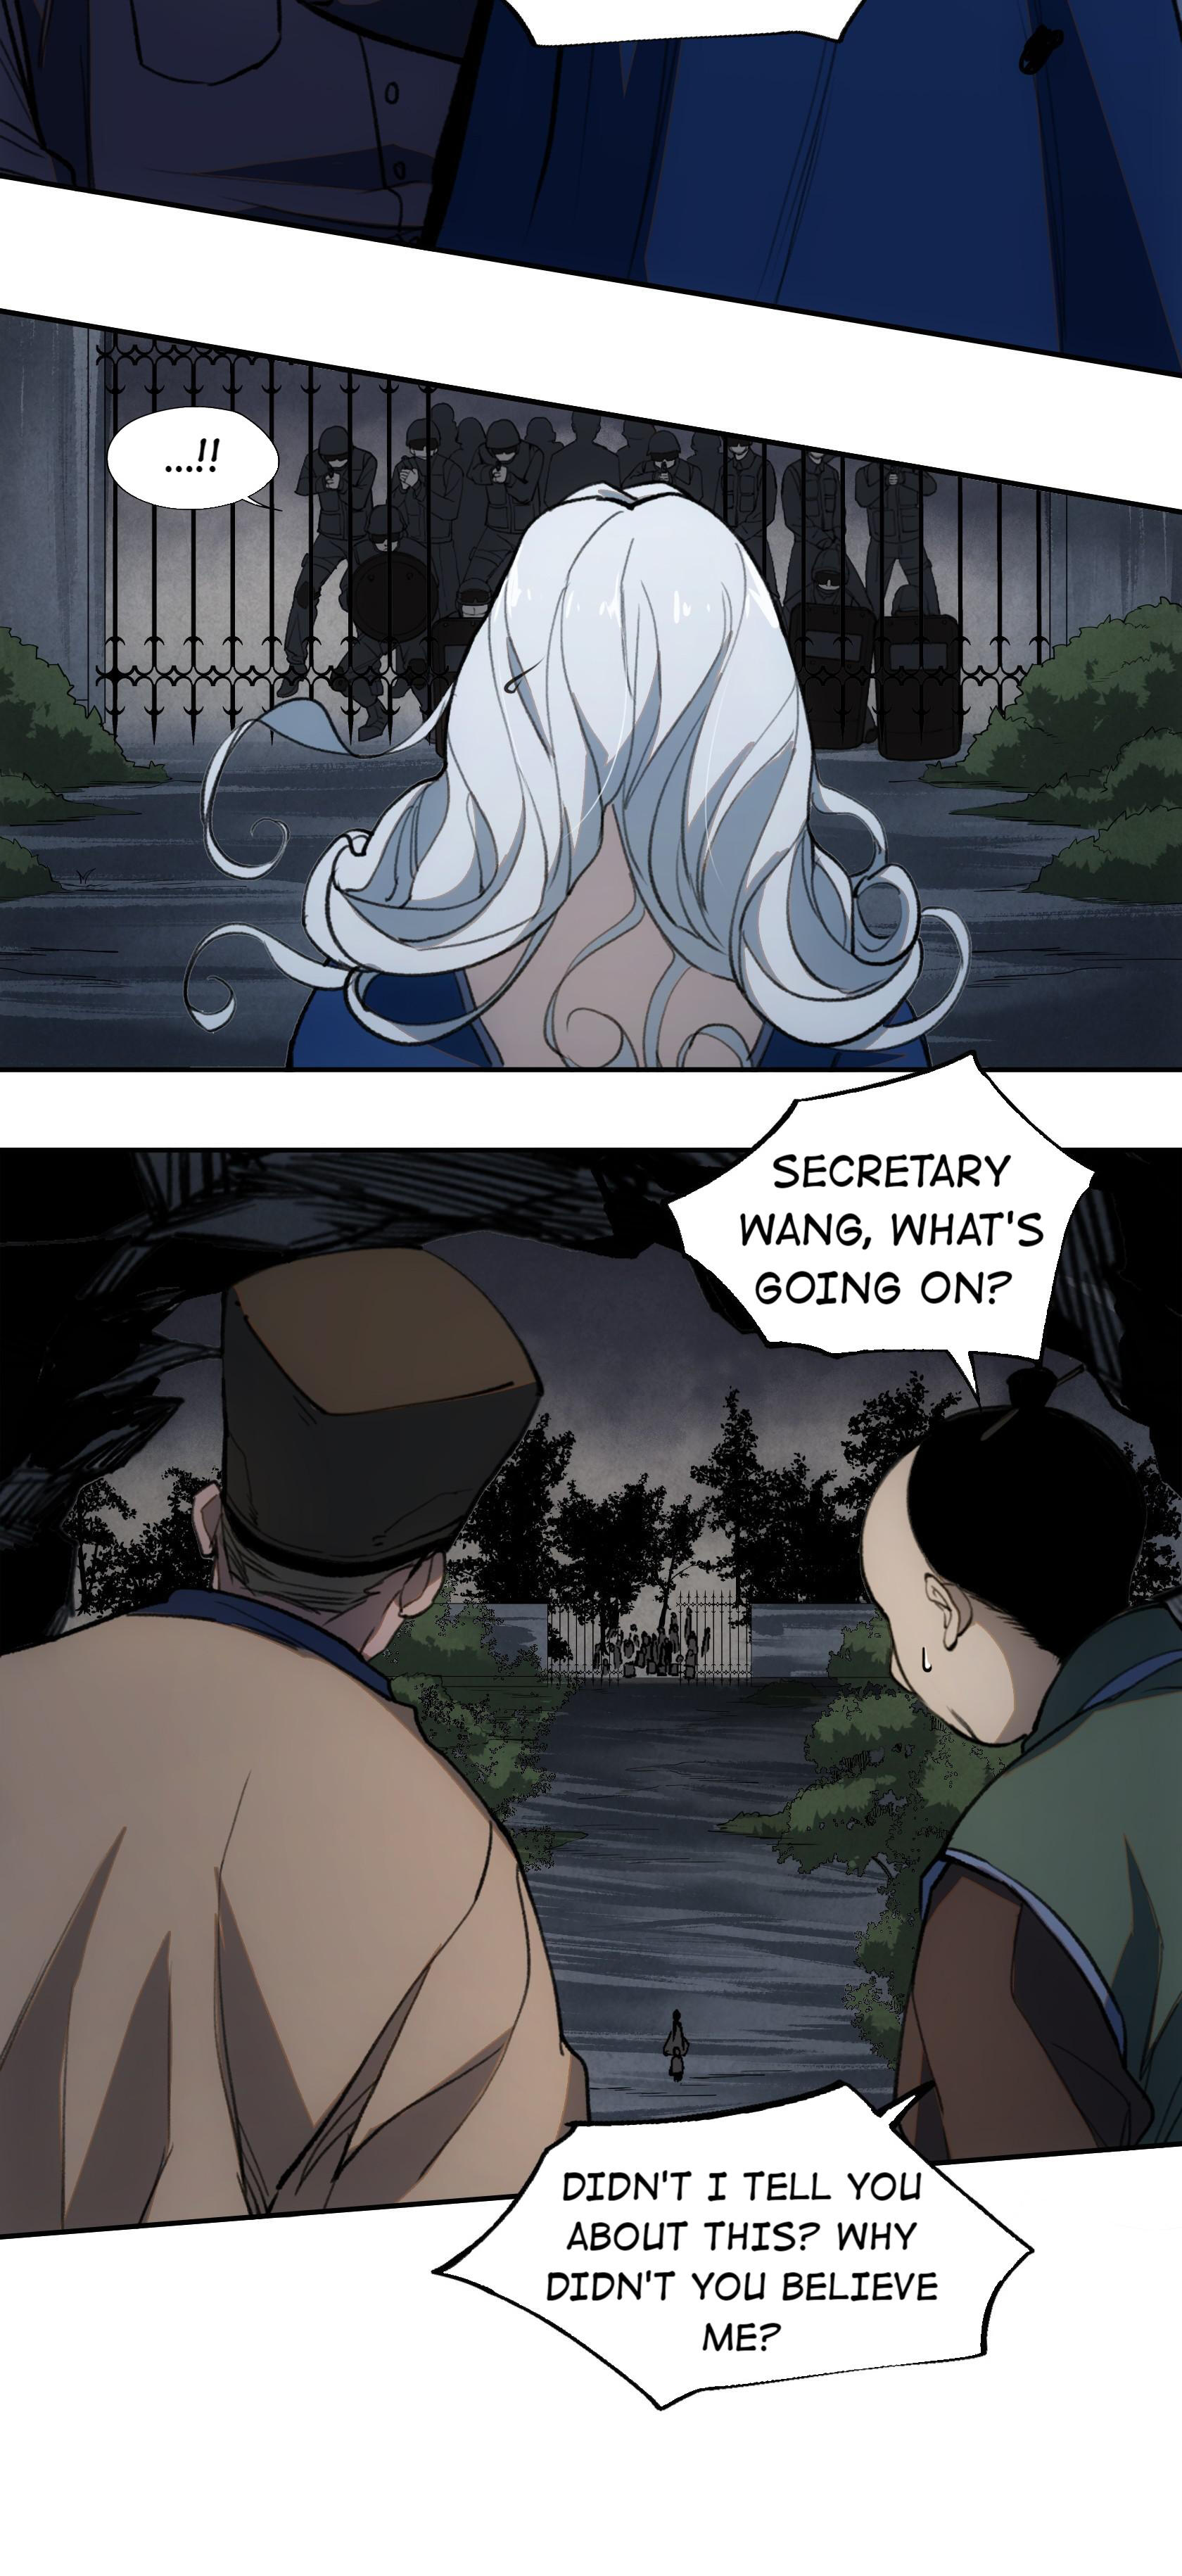 Beholder of the Abyss Chapter 32-eng-li - Page 39